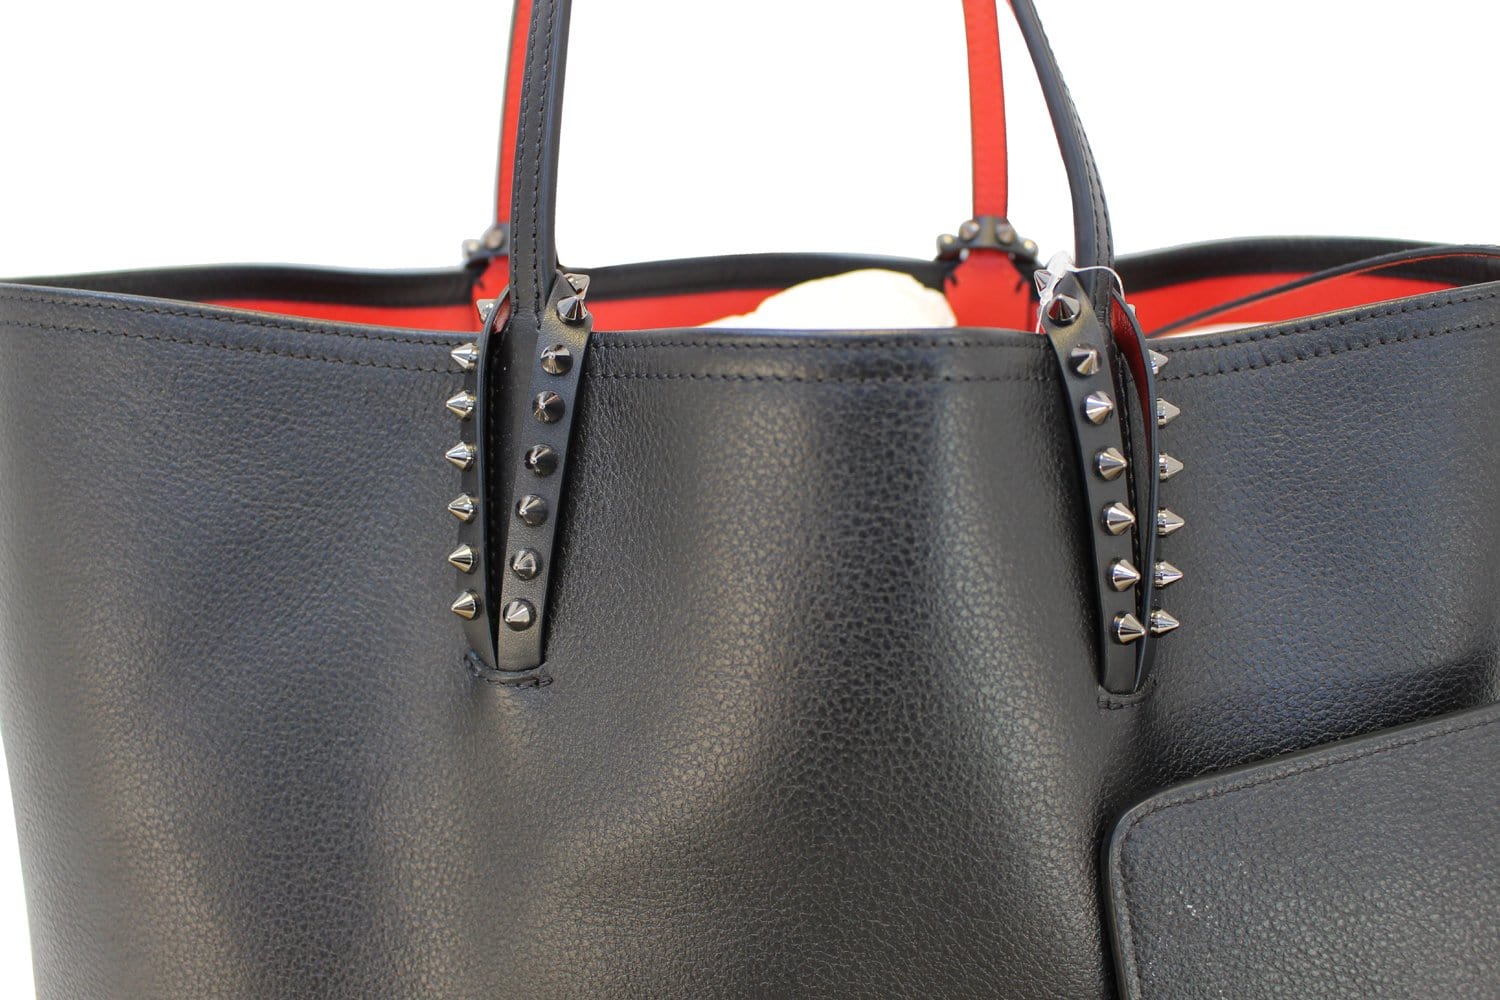 Grey Cabata studded leather tote